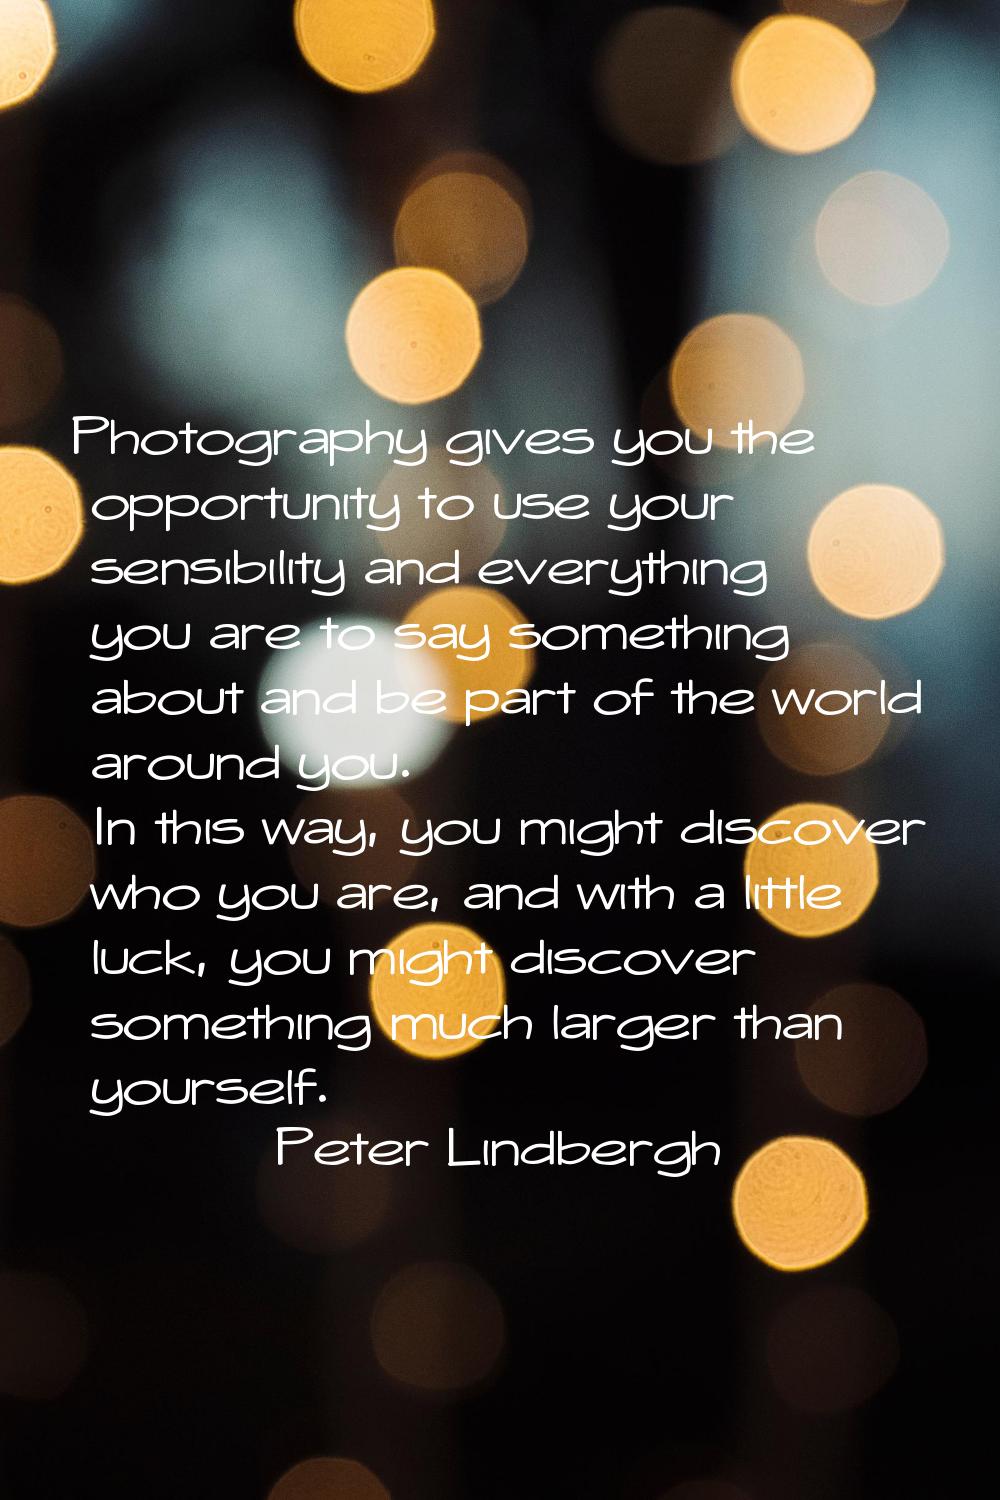 Photography gives you the opportunity to use your sensibility and everything you are to say somethi